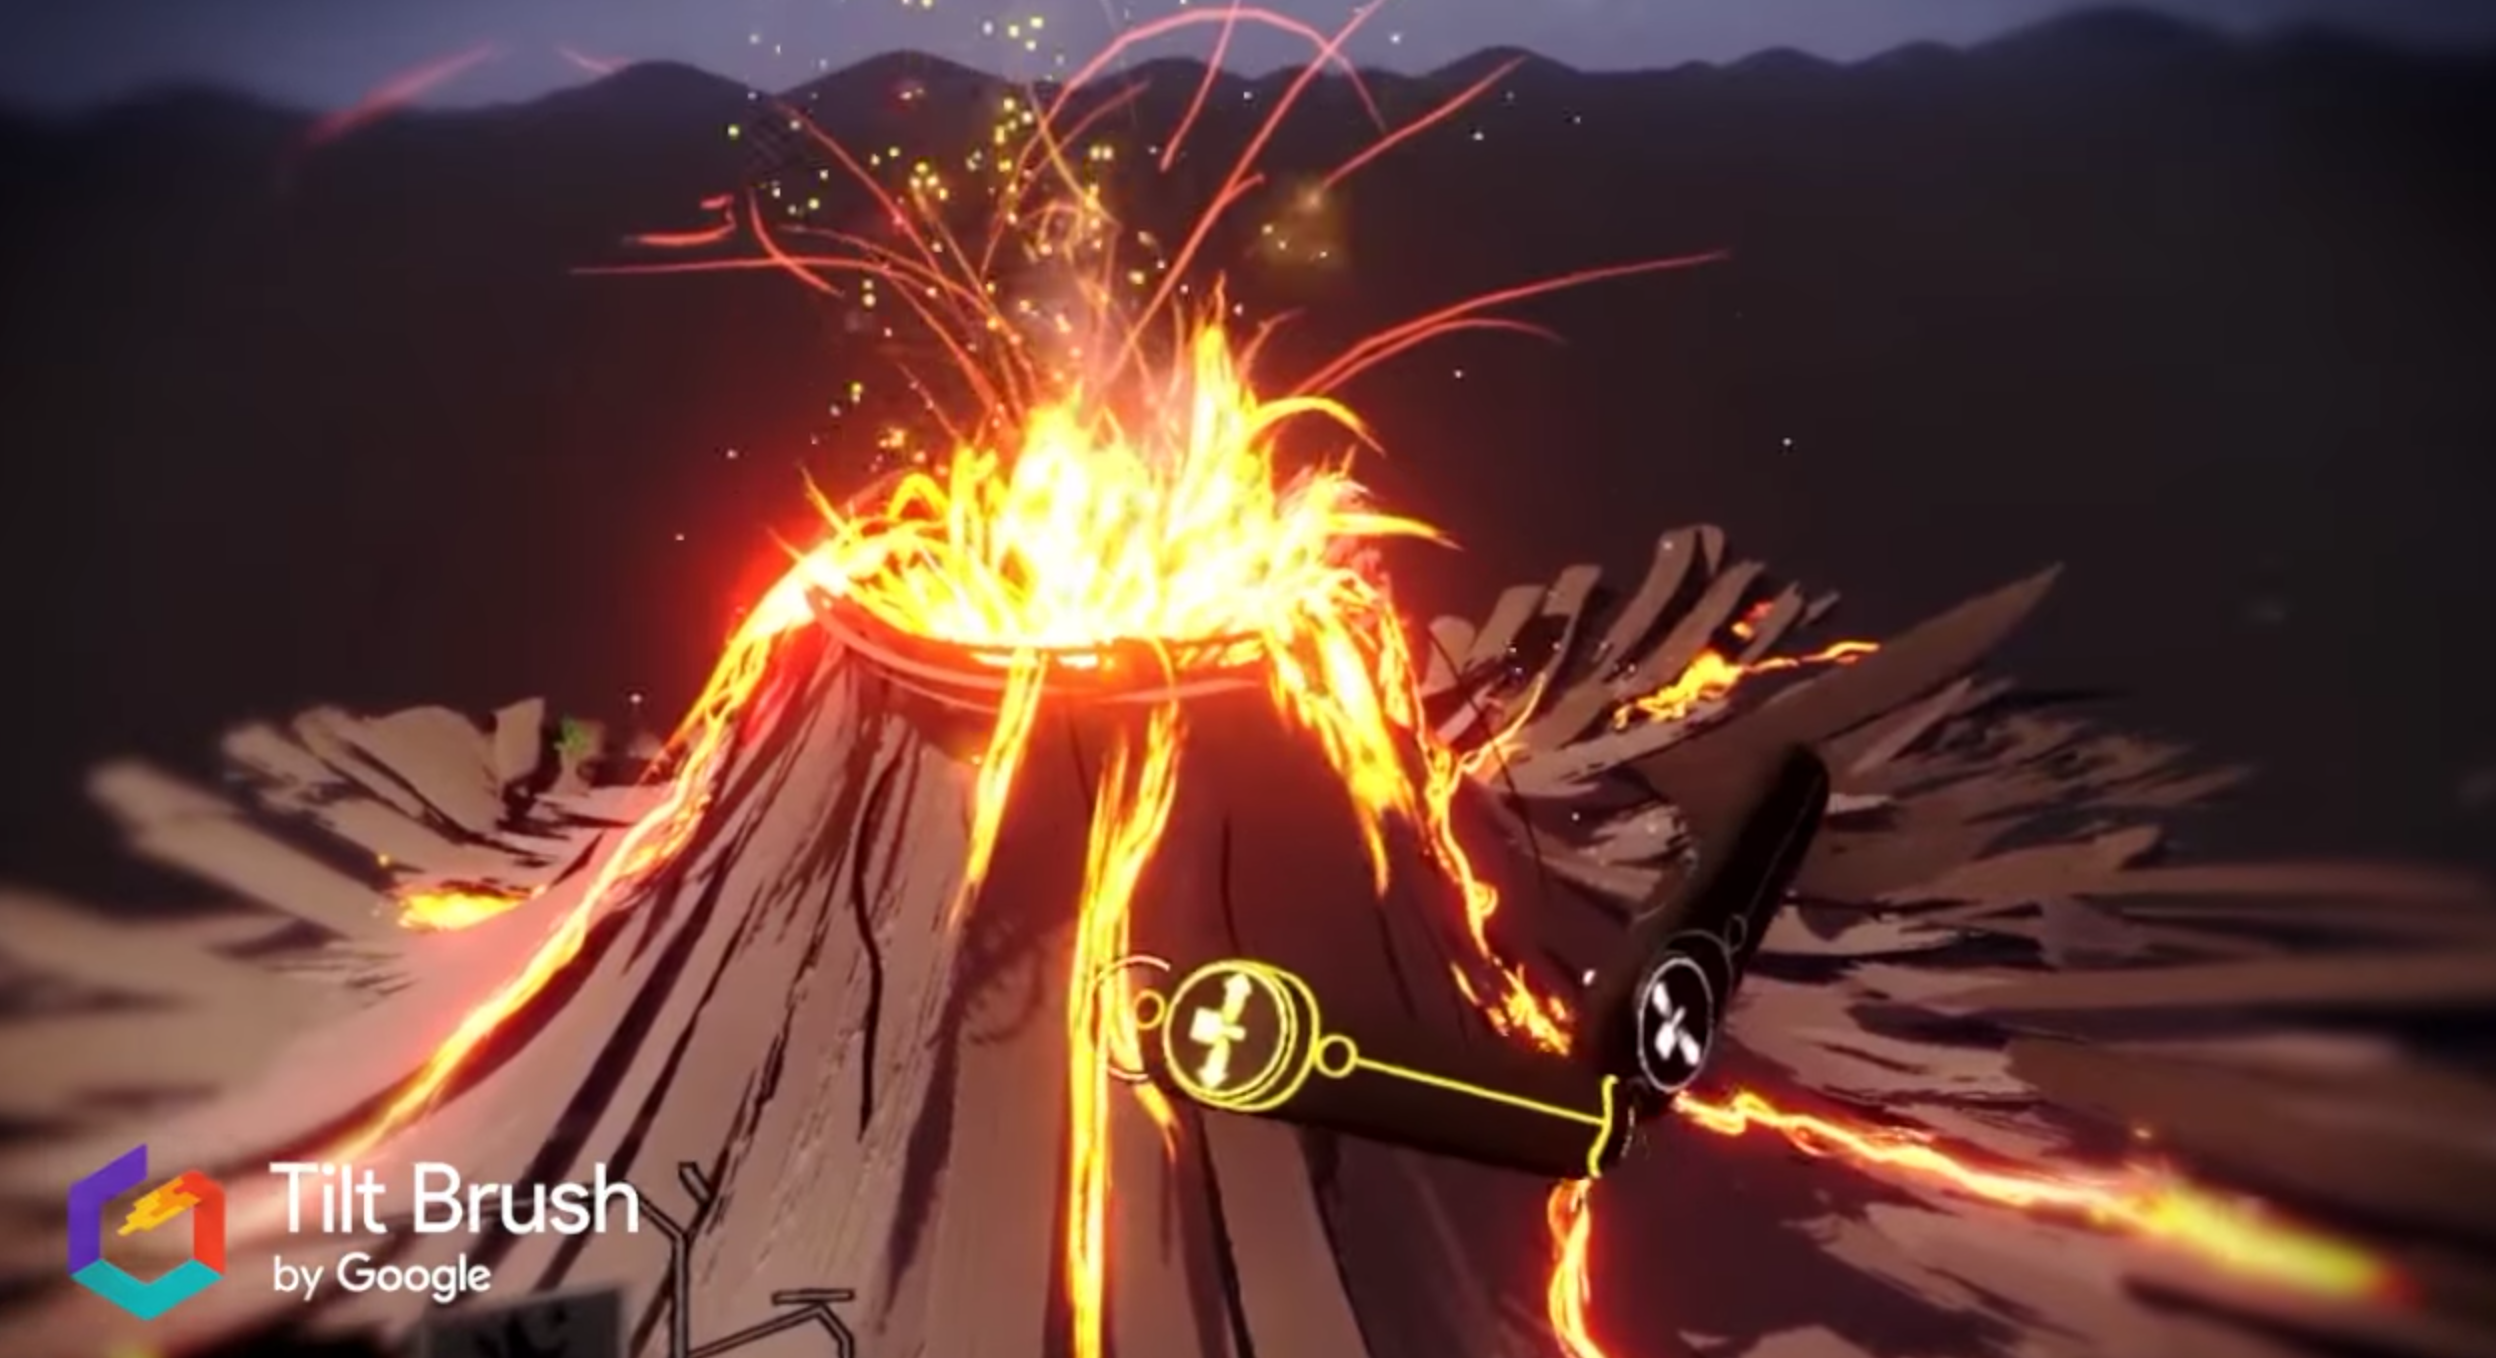 New Google Tilt Brush demo shows what it's like to with friends in VR TechCrunch